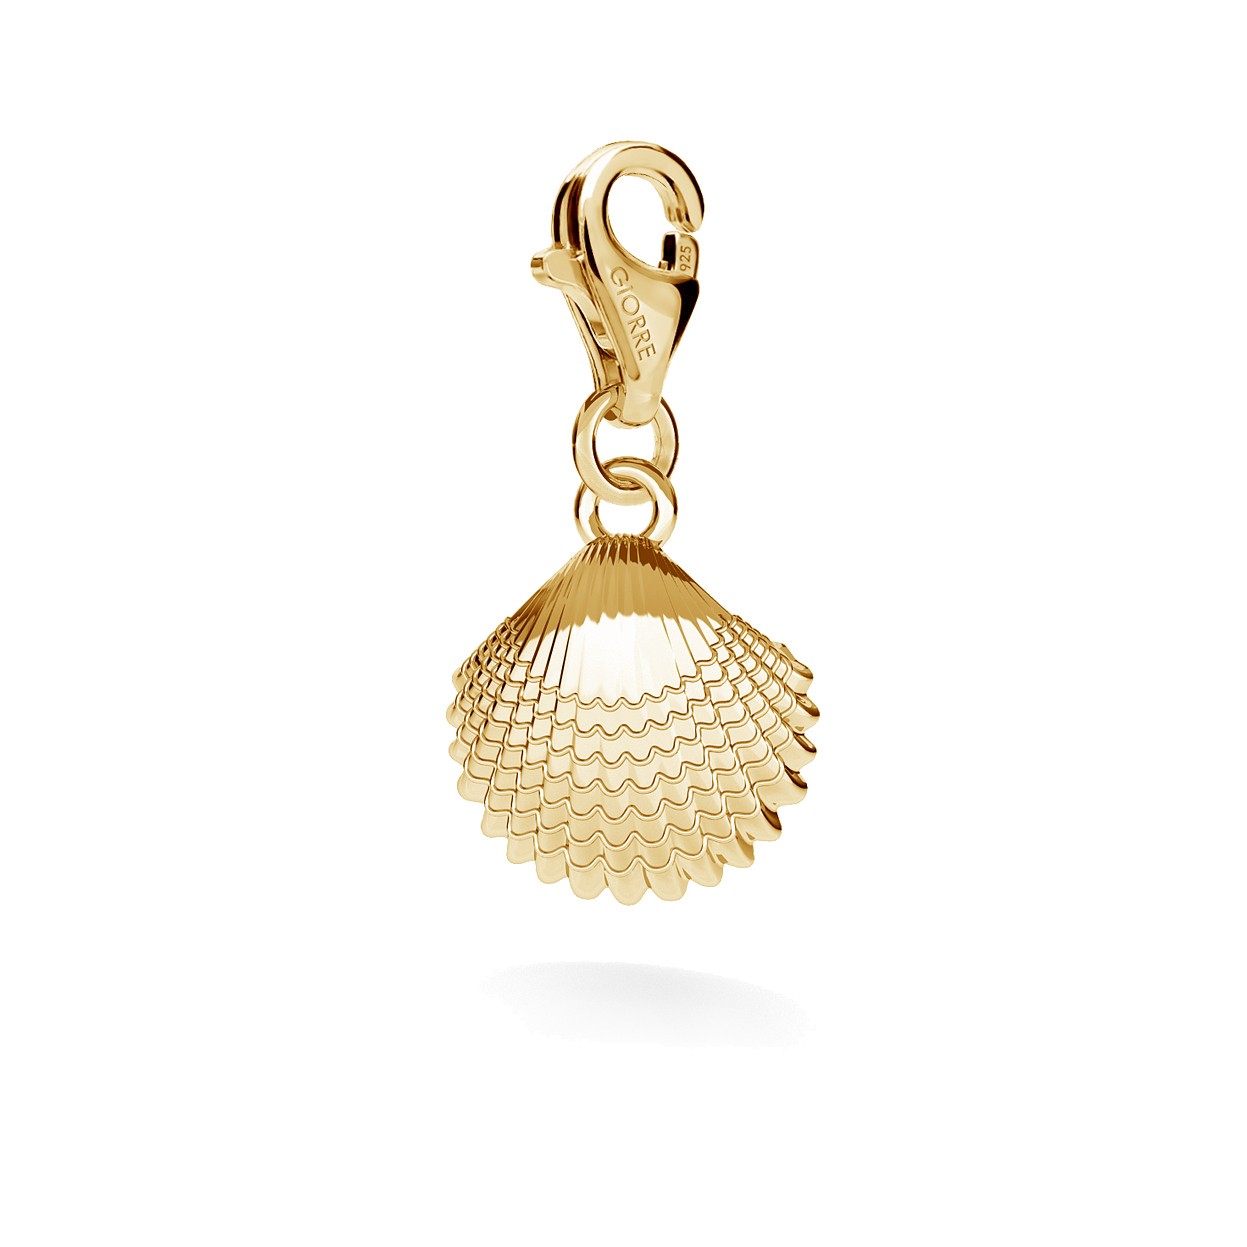 CHARM 88, SMALL SEA SHELL, SILVER 925, RHODIUM OR GOLD PLATED